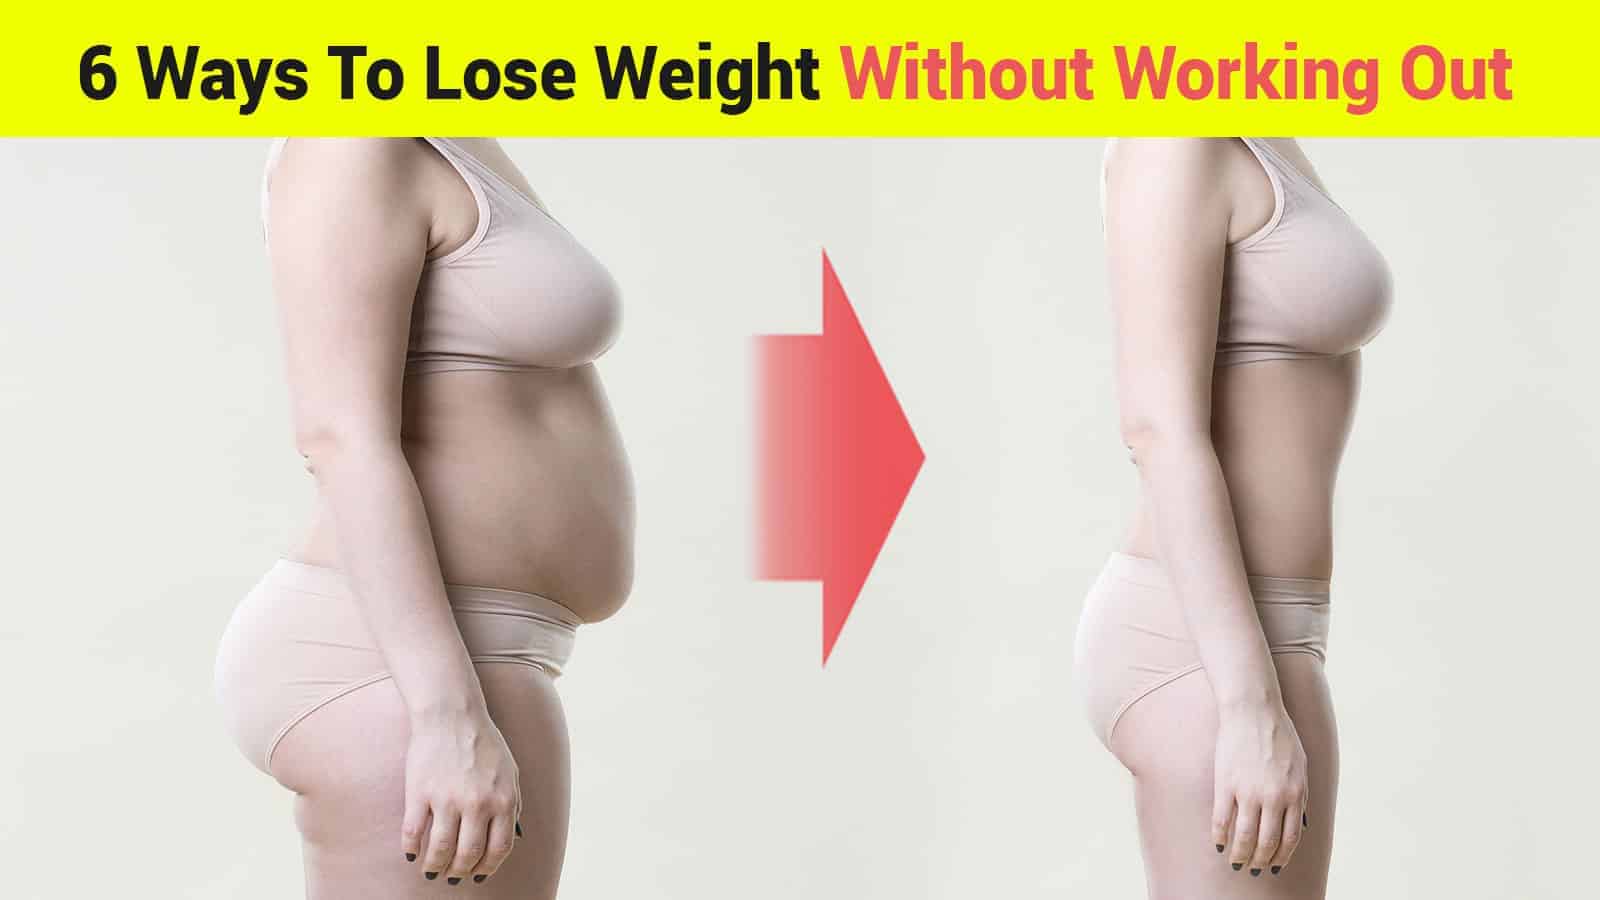 6 Ways To Lose Weight Without Working Out